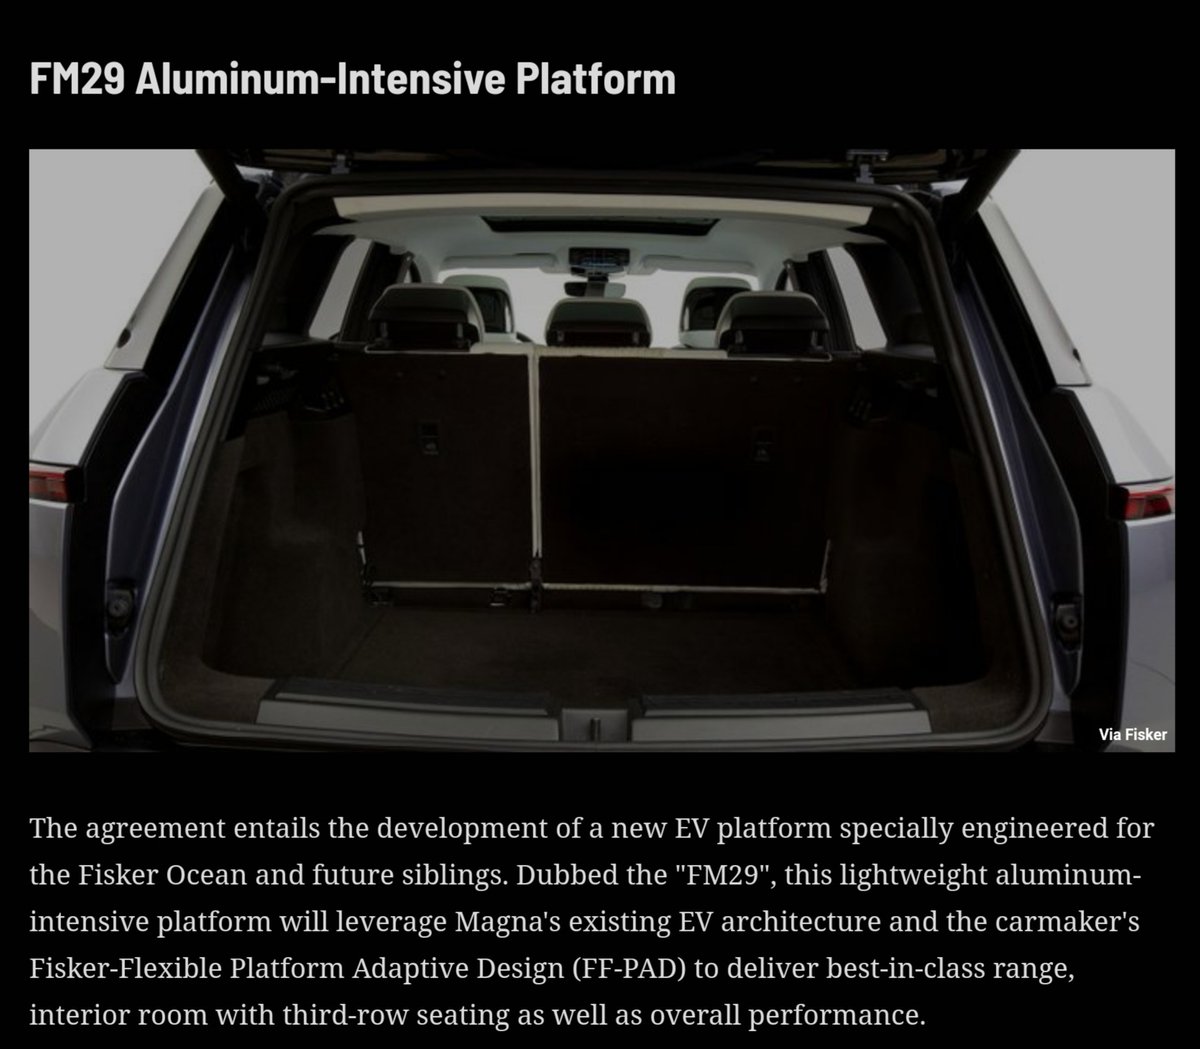 1) What is the platform and who is the other large OEM using the same platform? The platform is called "FM29" and uniquely developed by Fisker: